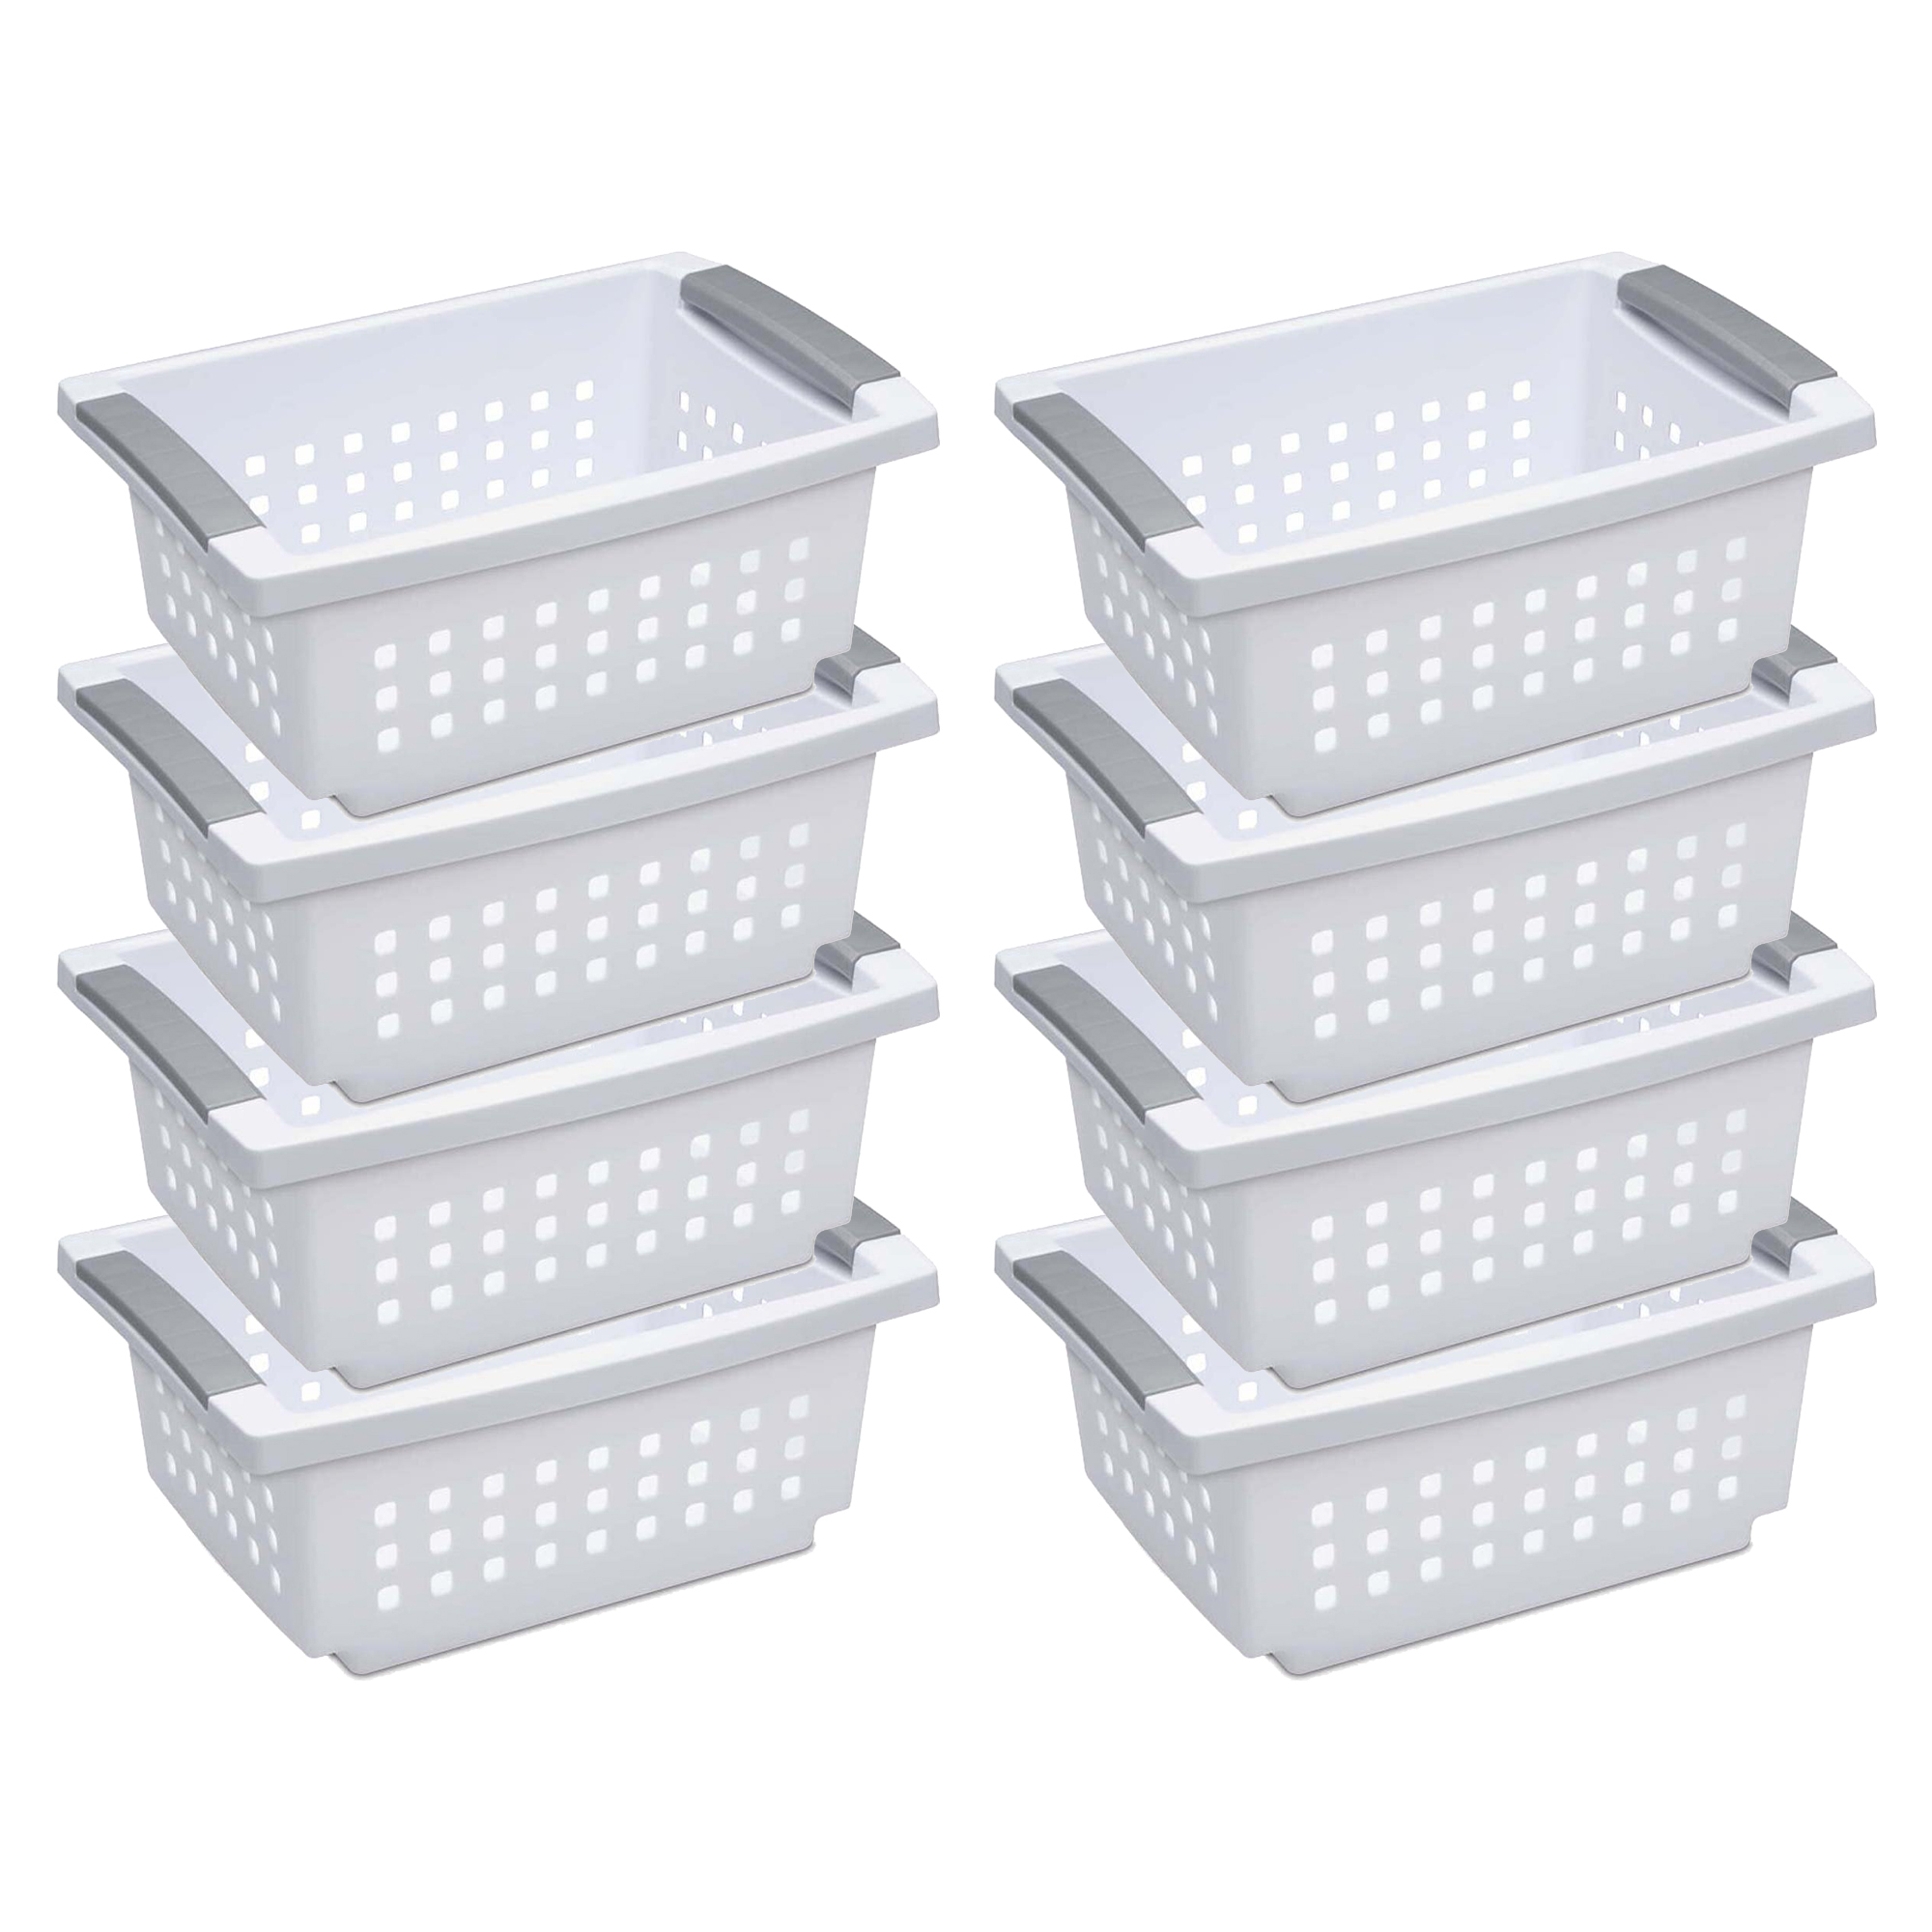 Sterilite Small Stacking Storage Basket with Comfort Grip Handles, 8 Pack - image 1 of 11